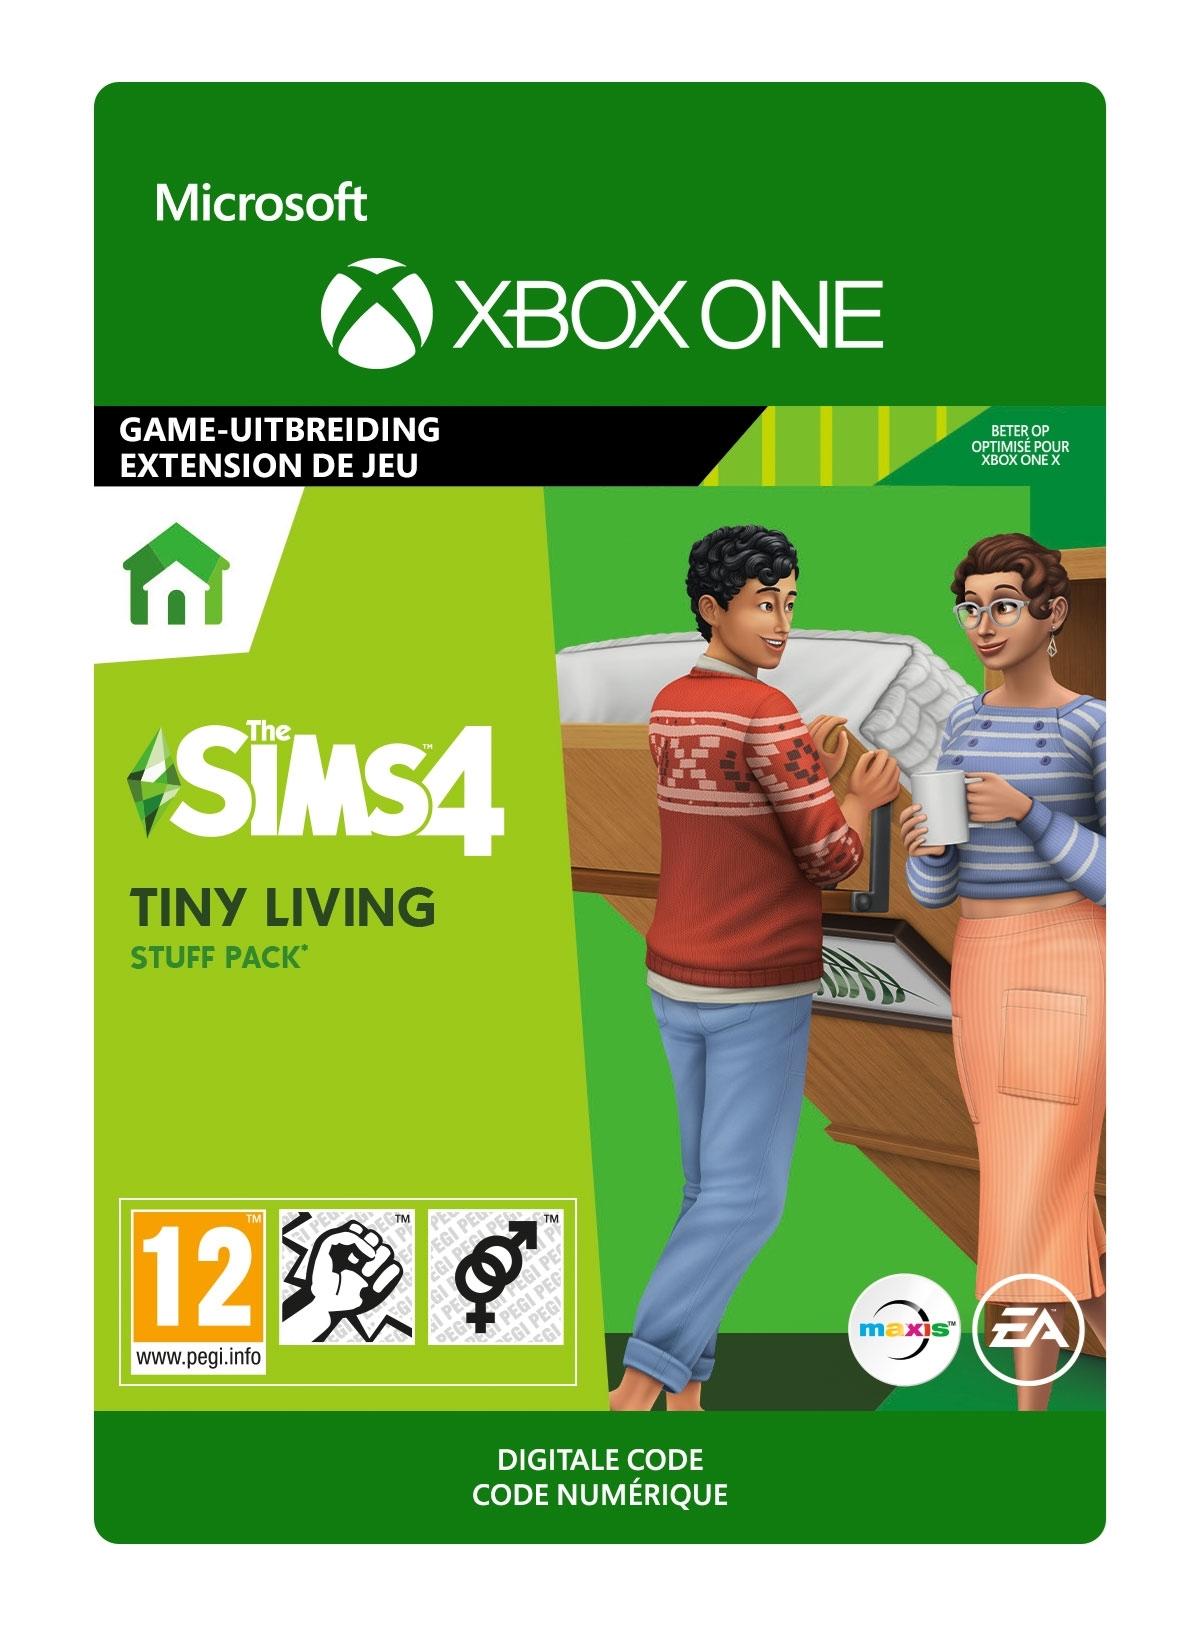 The Sims 4: Tiny Living Stuff - Xbox One - Add-on | 7D4-00536 (79a17567-7656-564a-8f2d-10f41a5e5758)